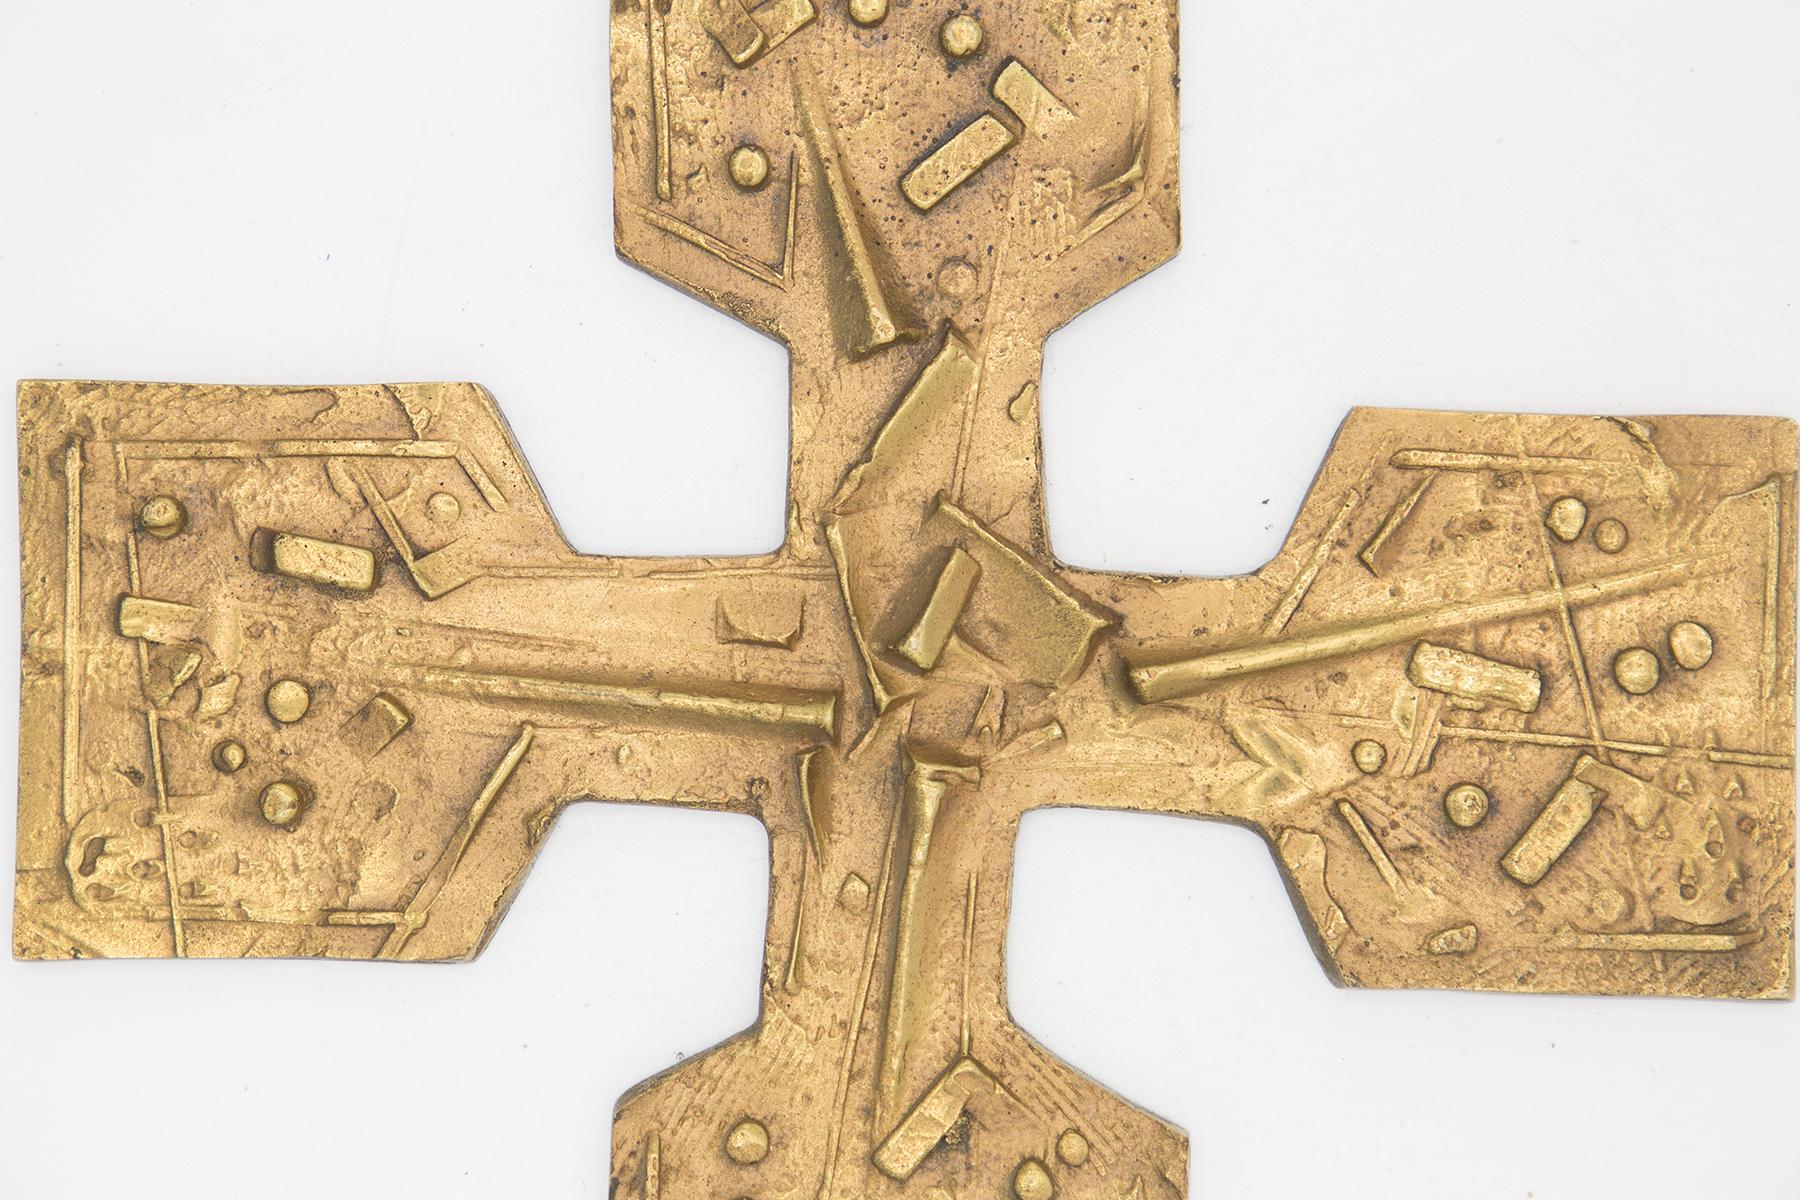 Rare brass cross designed by Arnaldo Pomodoro and his brother Giò Pomodoro in the 1950s, of fine Italian manufacture. It is part of the V/58/16 model.
The cross is made entirely of brass, of superhuman beauty. The cross has a fairly classical